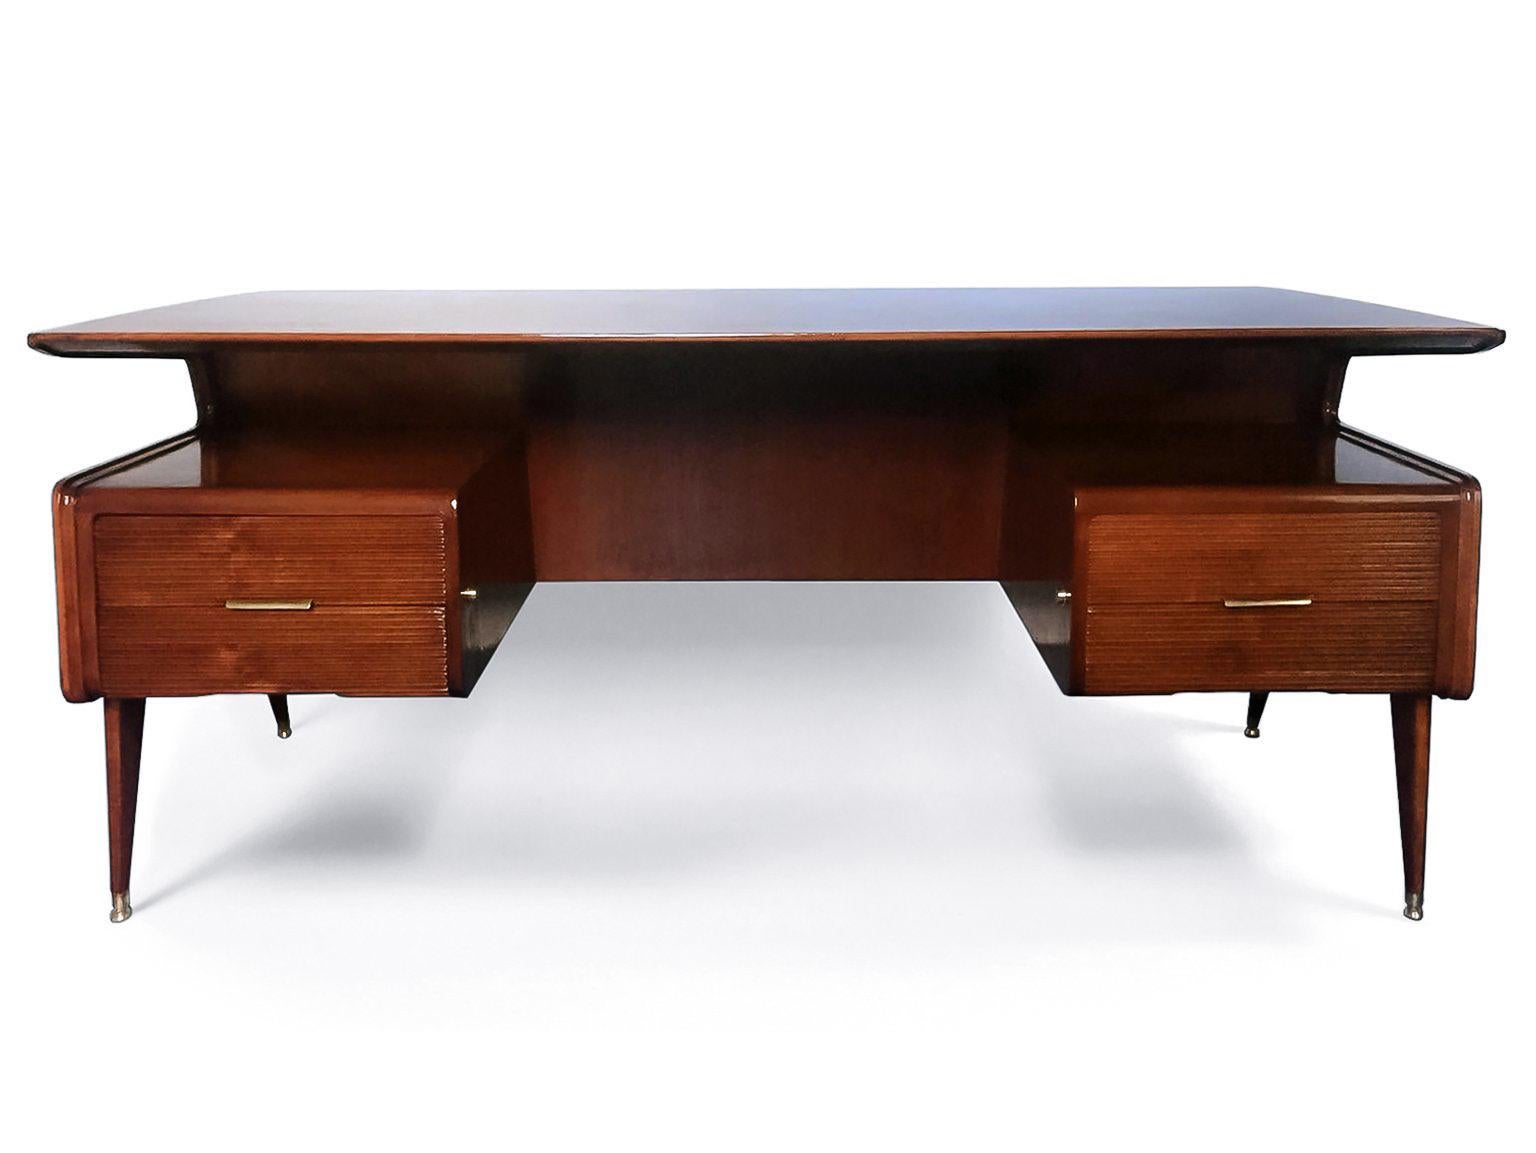 Extraordinary executive desk designed in the 1950s and attributed to the famous Italian architect Guglielmo Ulrich.
Its walnut structure is characterized by an unusual sculptural and architectural shape, provided with four drawers all lockable and